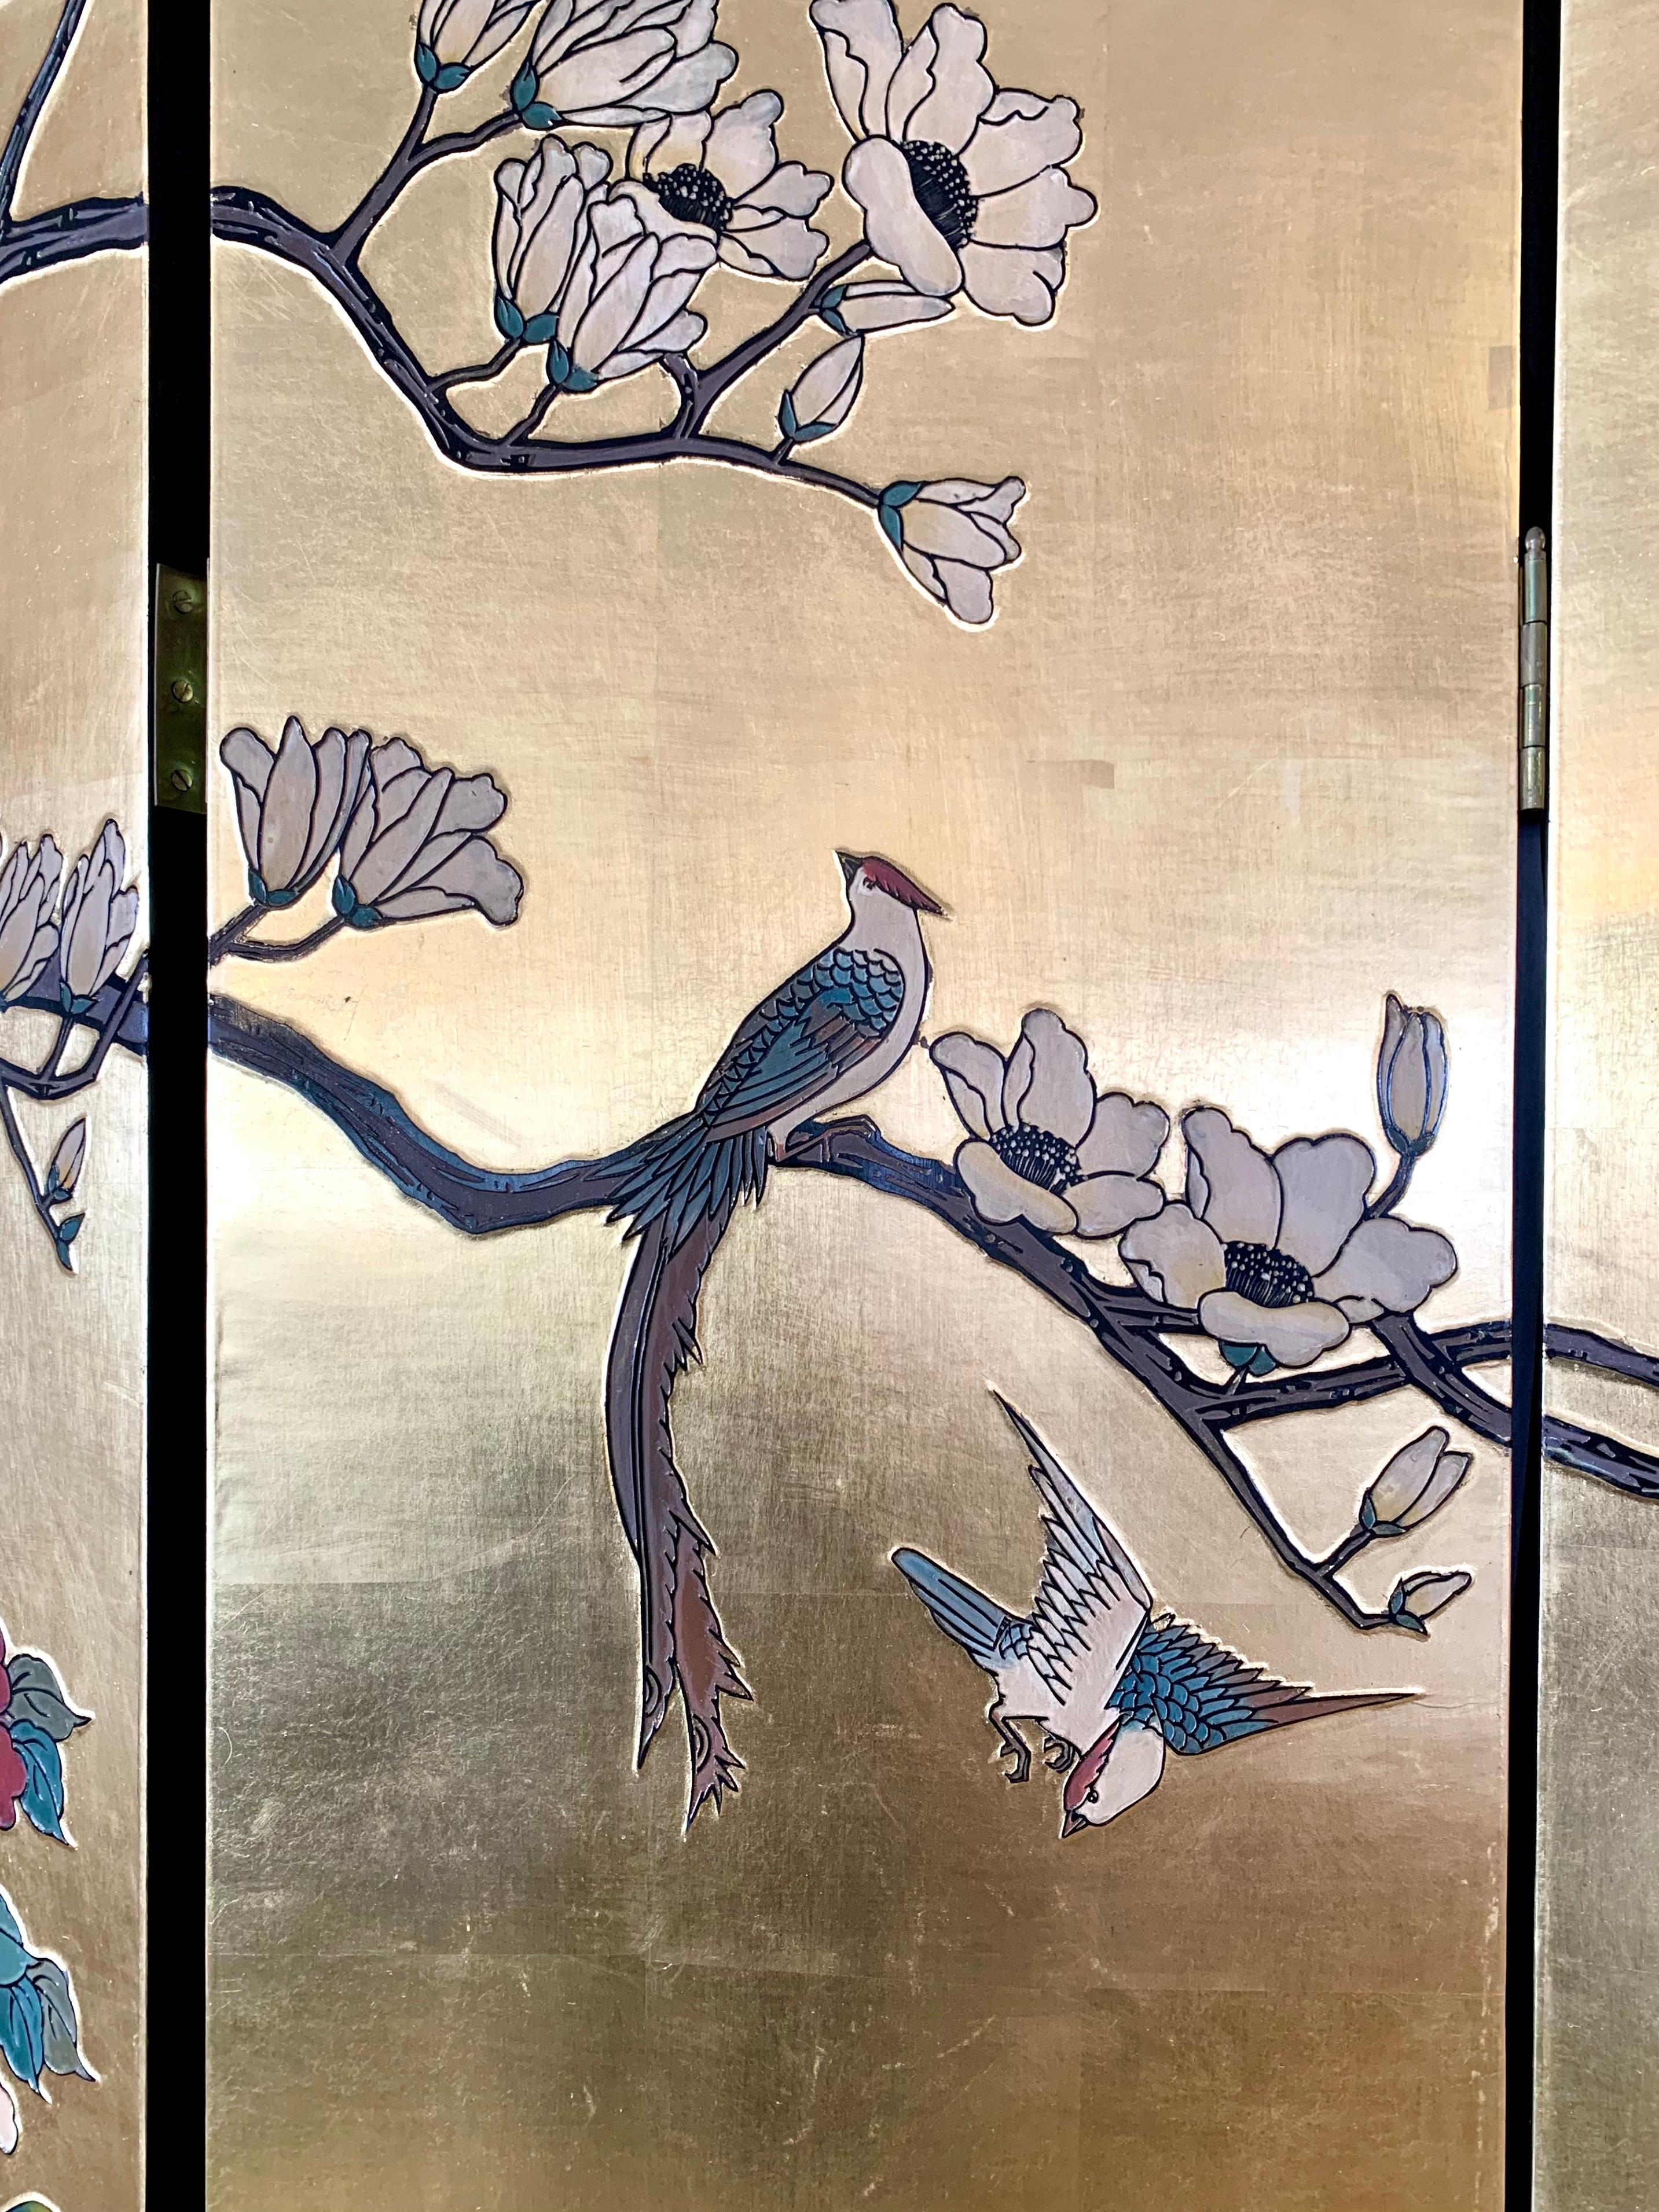 20th Century Chinese Gold Leaf Four Panel Room Divider Screen